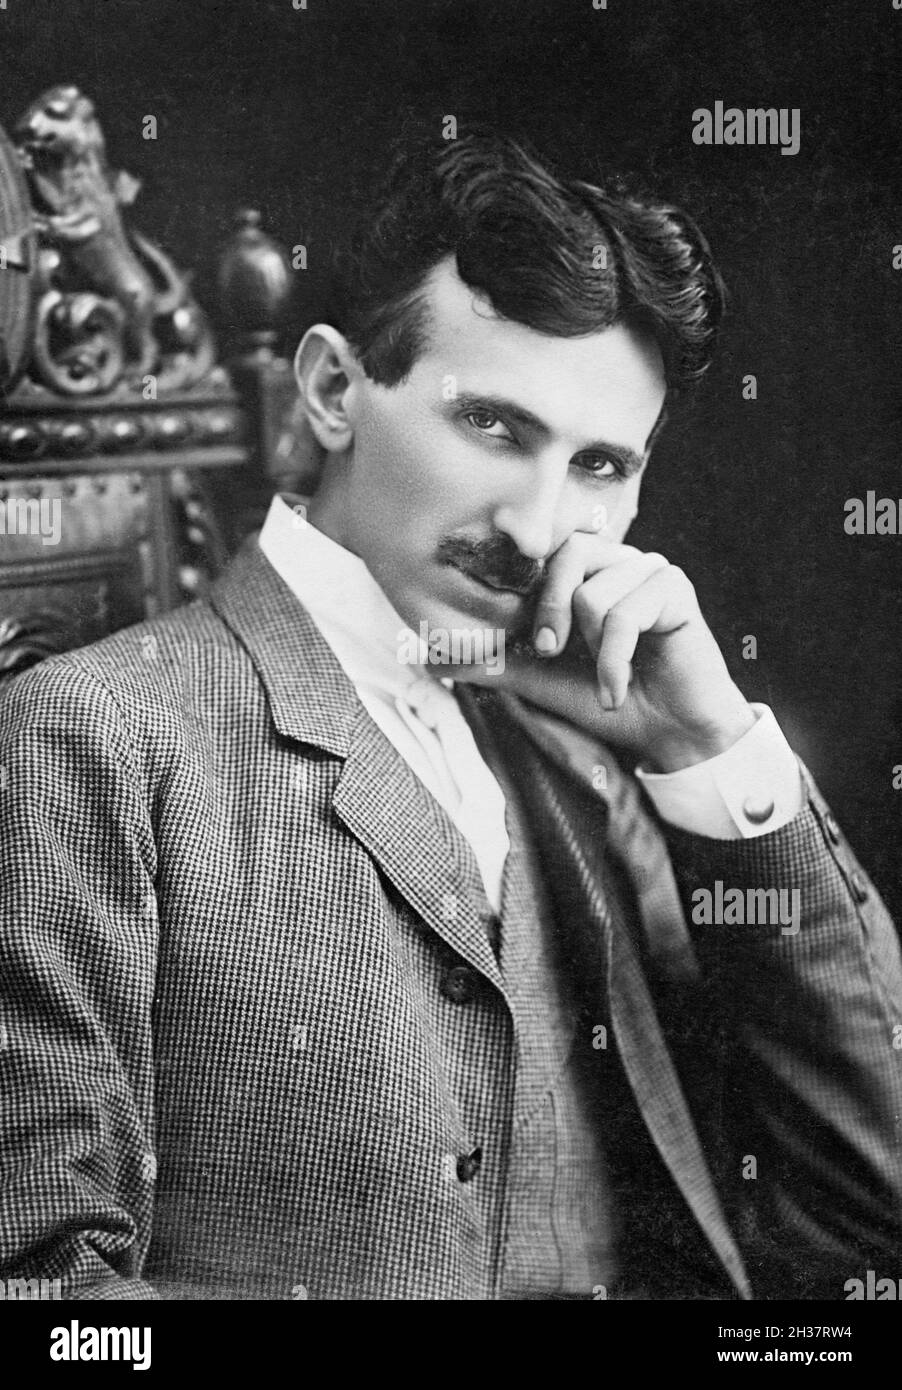 Nikola Tesla (1856-1943) in his early forties. Tesla was a Serbian American inventor and engineer best known for his work on alternating current (AC) electricity supply. Stock Photo